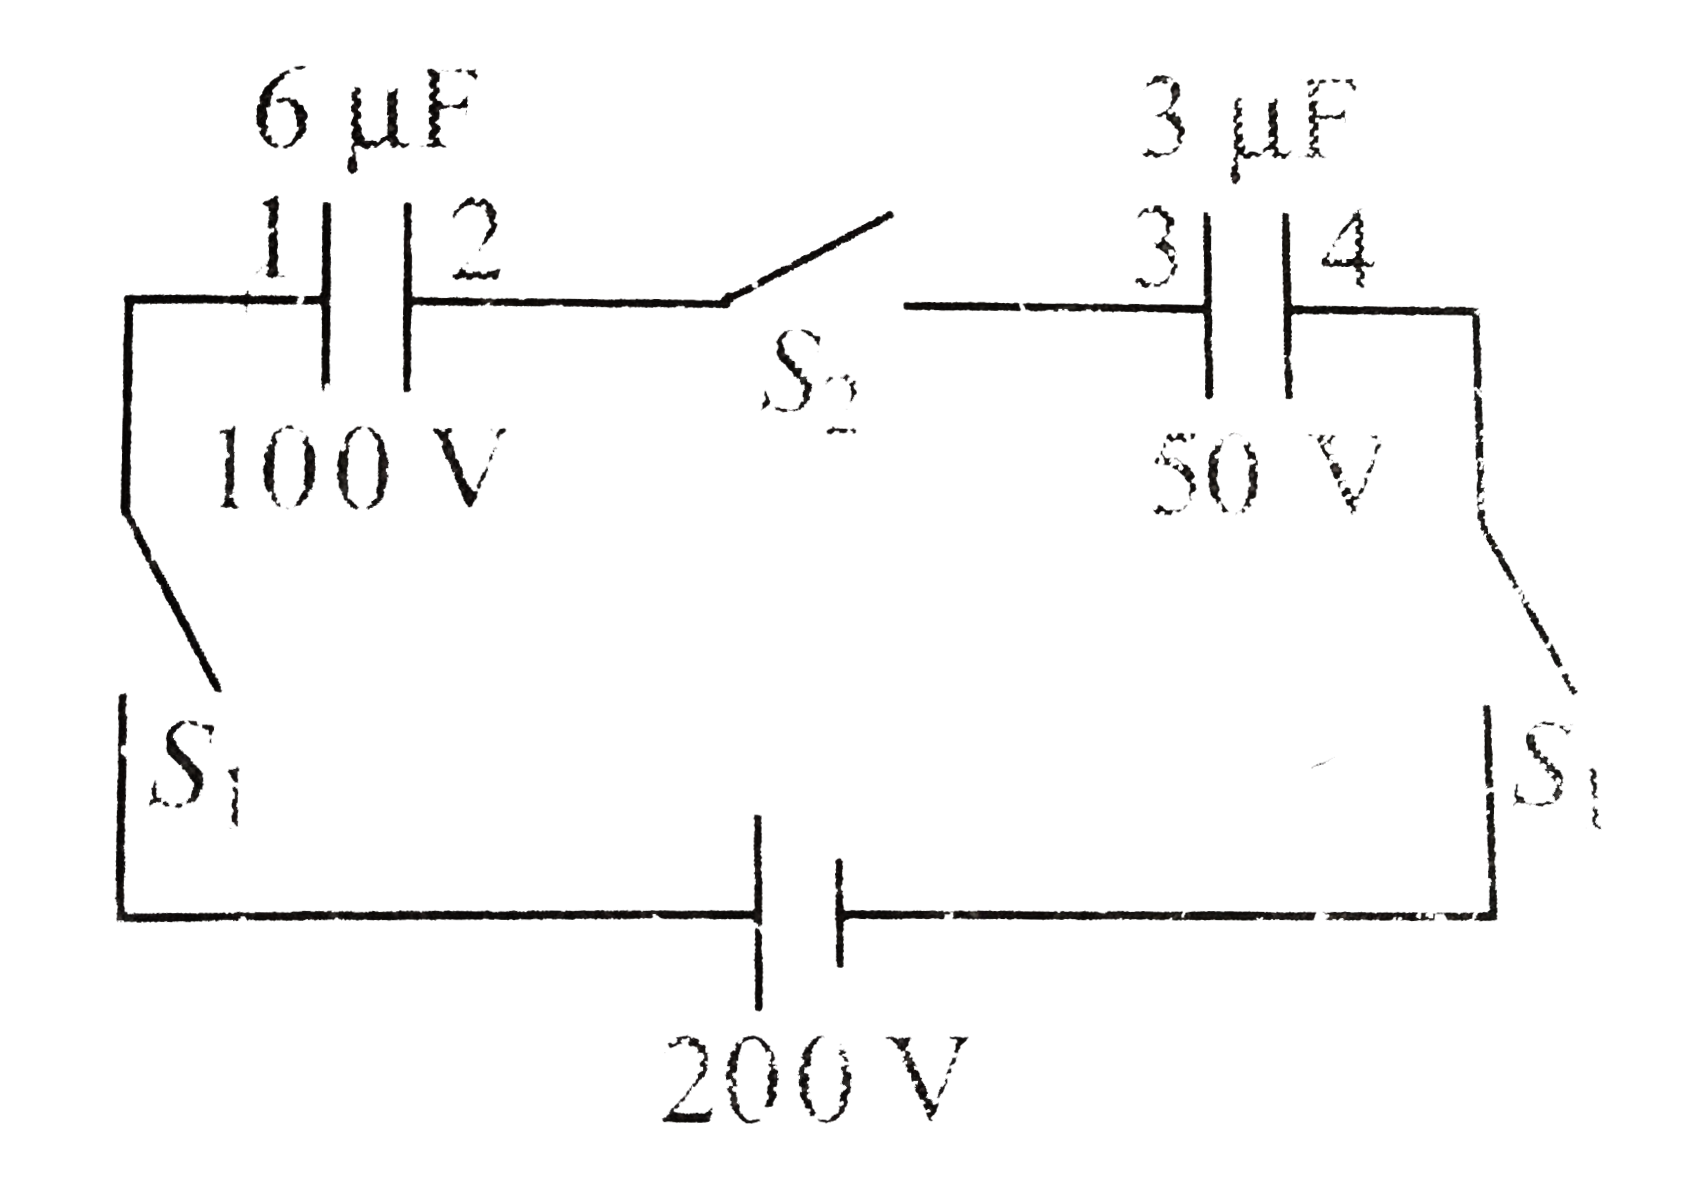 Two capacitor of capacity 6 muF and 3muF are charged to 100 V and 50 V separately and connected as shown in figure. Now all the three switches S1,S2, and S3 are closed.      Let q1, q2, and q3 be the magnitudes of charges flown from switches S1, S2, and S3 after they are closed. Then